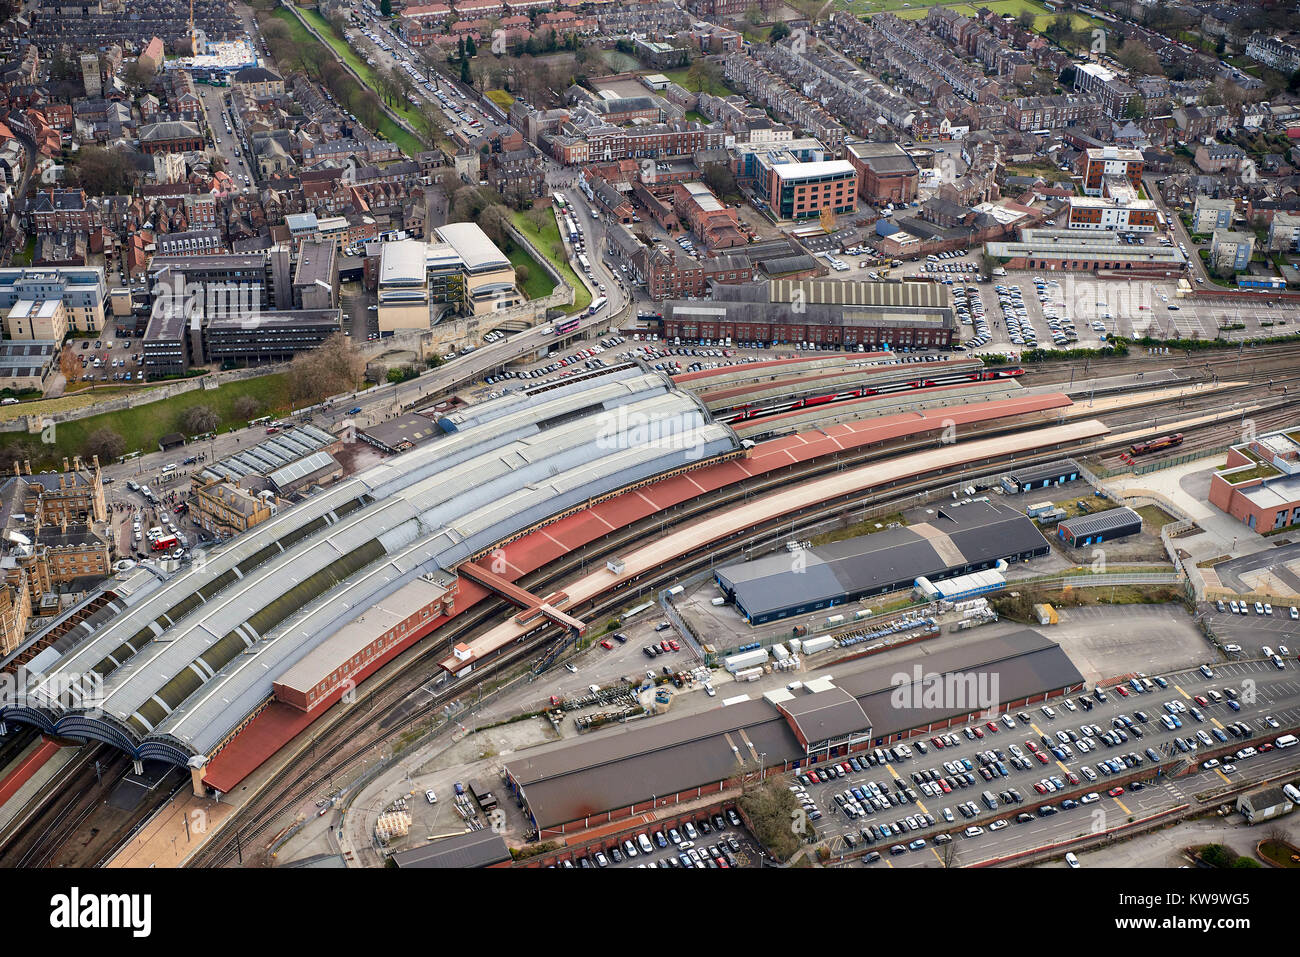 The wonderful curved roof of York Railway Station, shown from the air, York, North Yorkshire, Northern England, UK Stock Photo